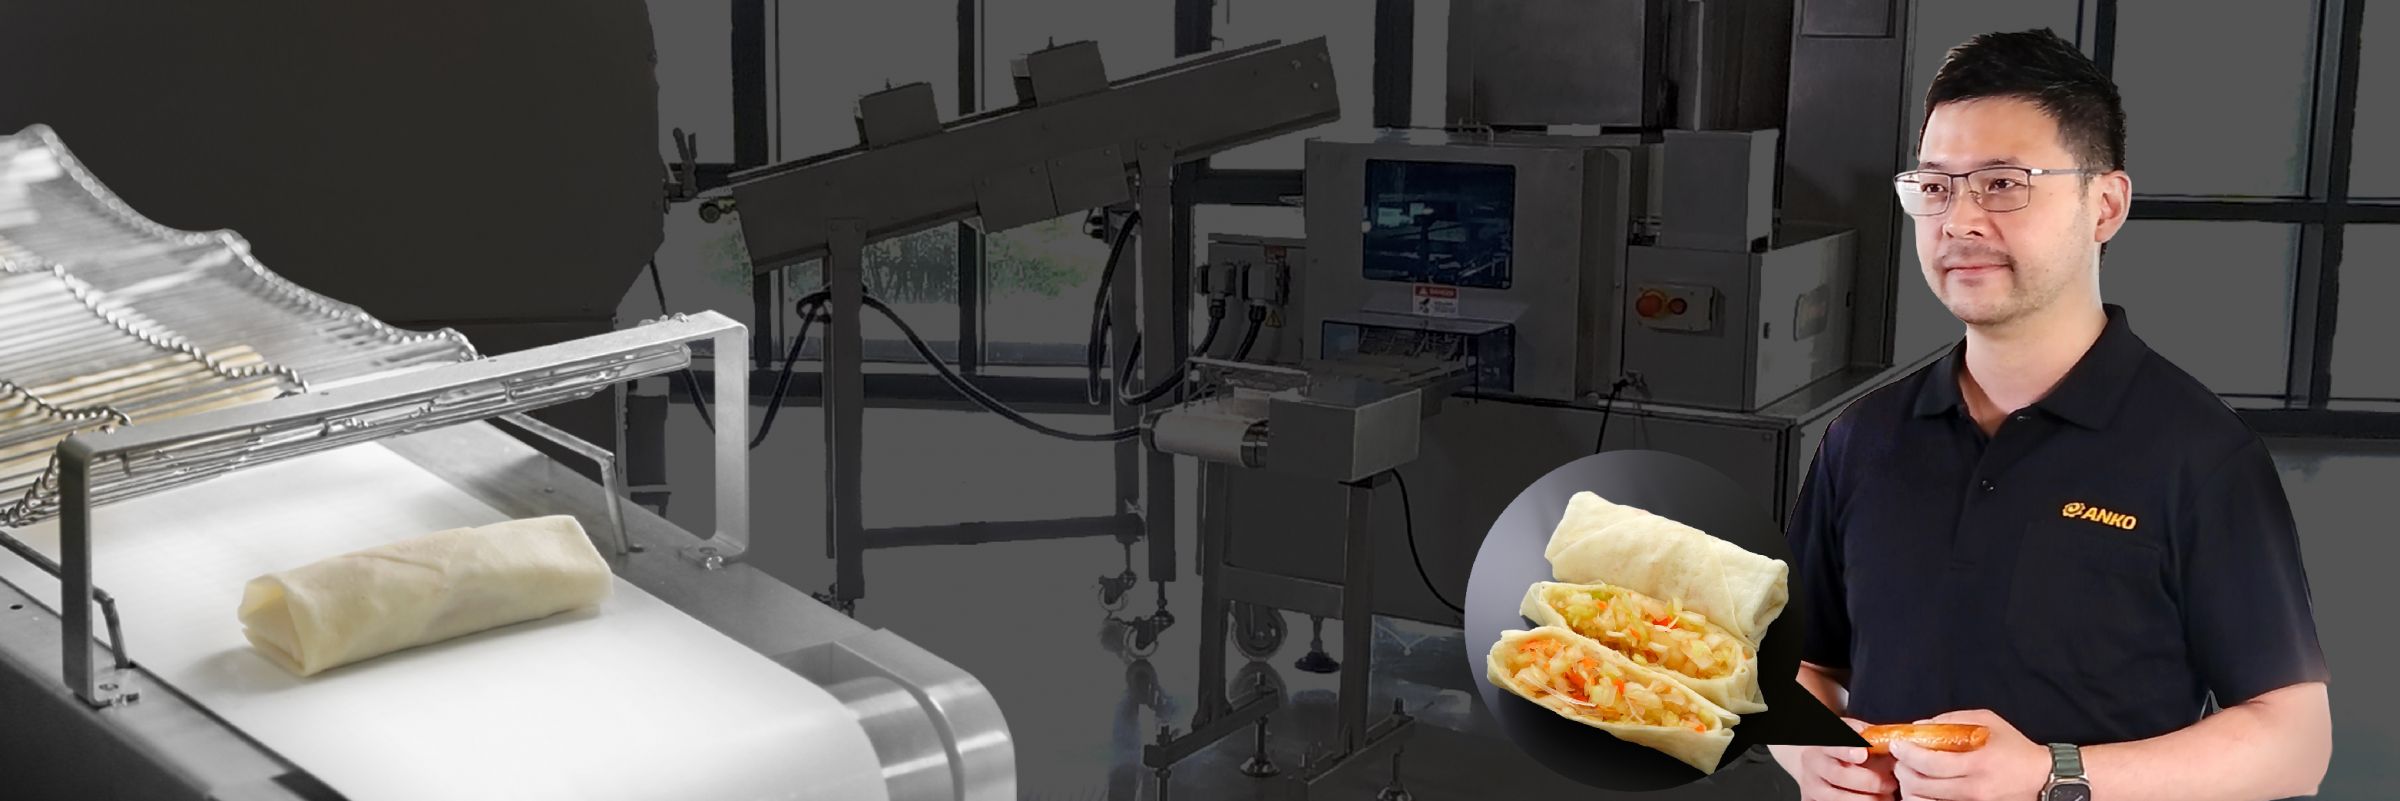 Produce Spring Rolls with Raw Ingredients  Discover ANKO’s Spring Roll Production Evolution